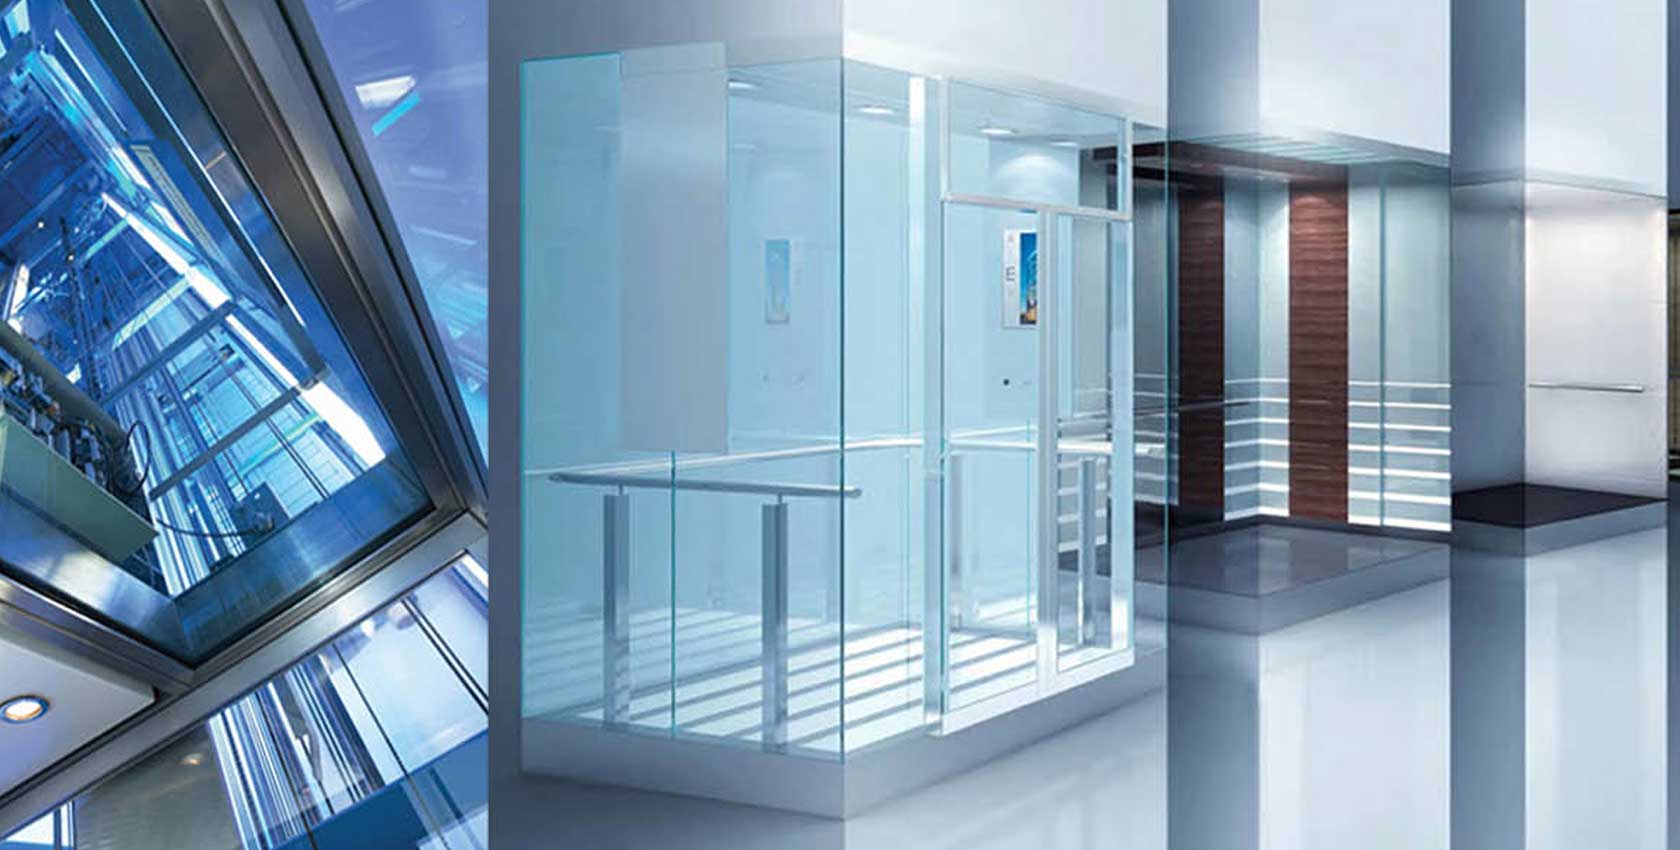 Elevator space occupancy detection